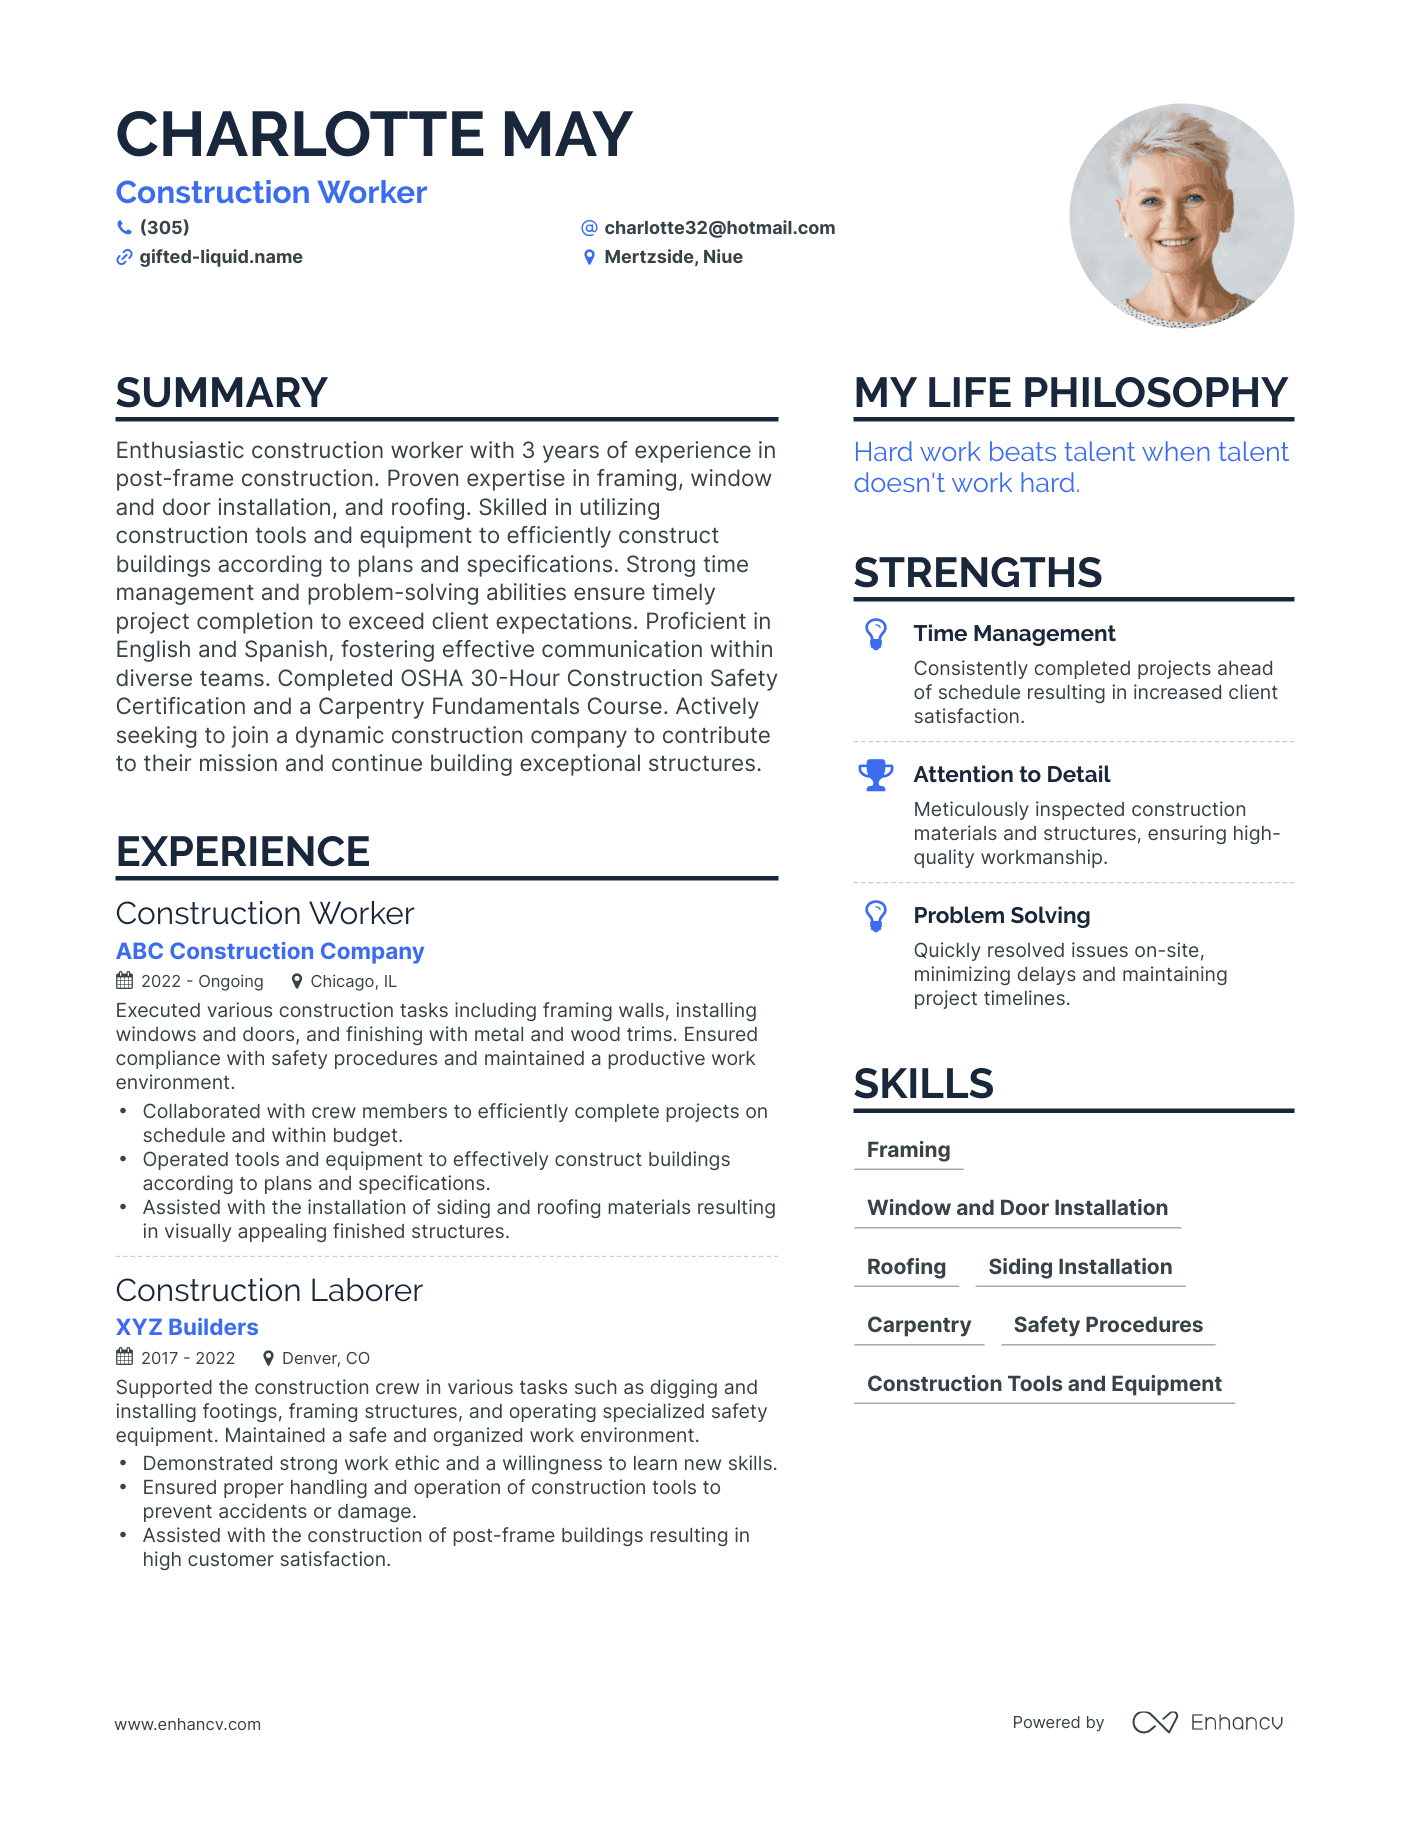 Construction Worker resume example